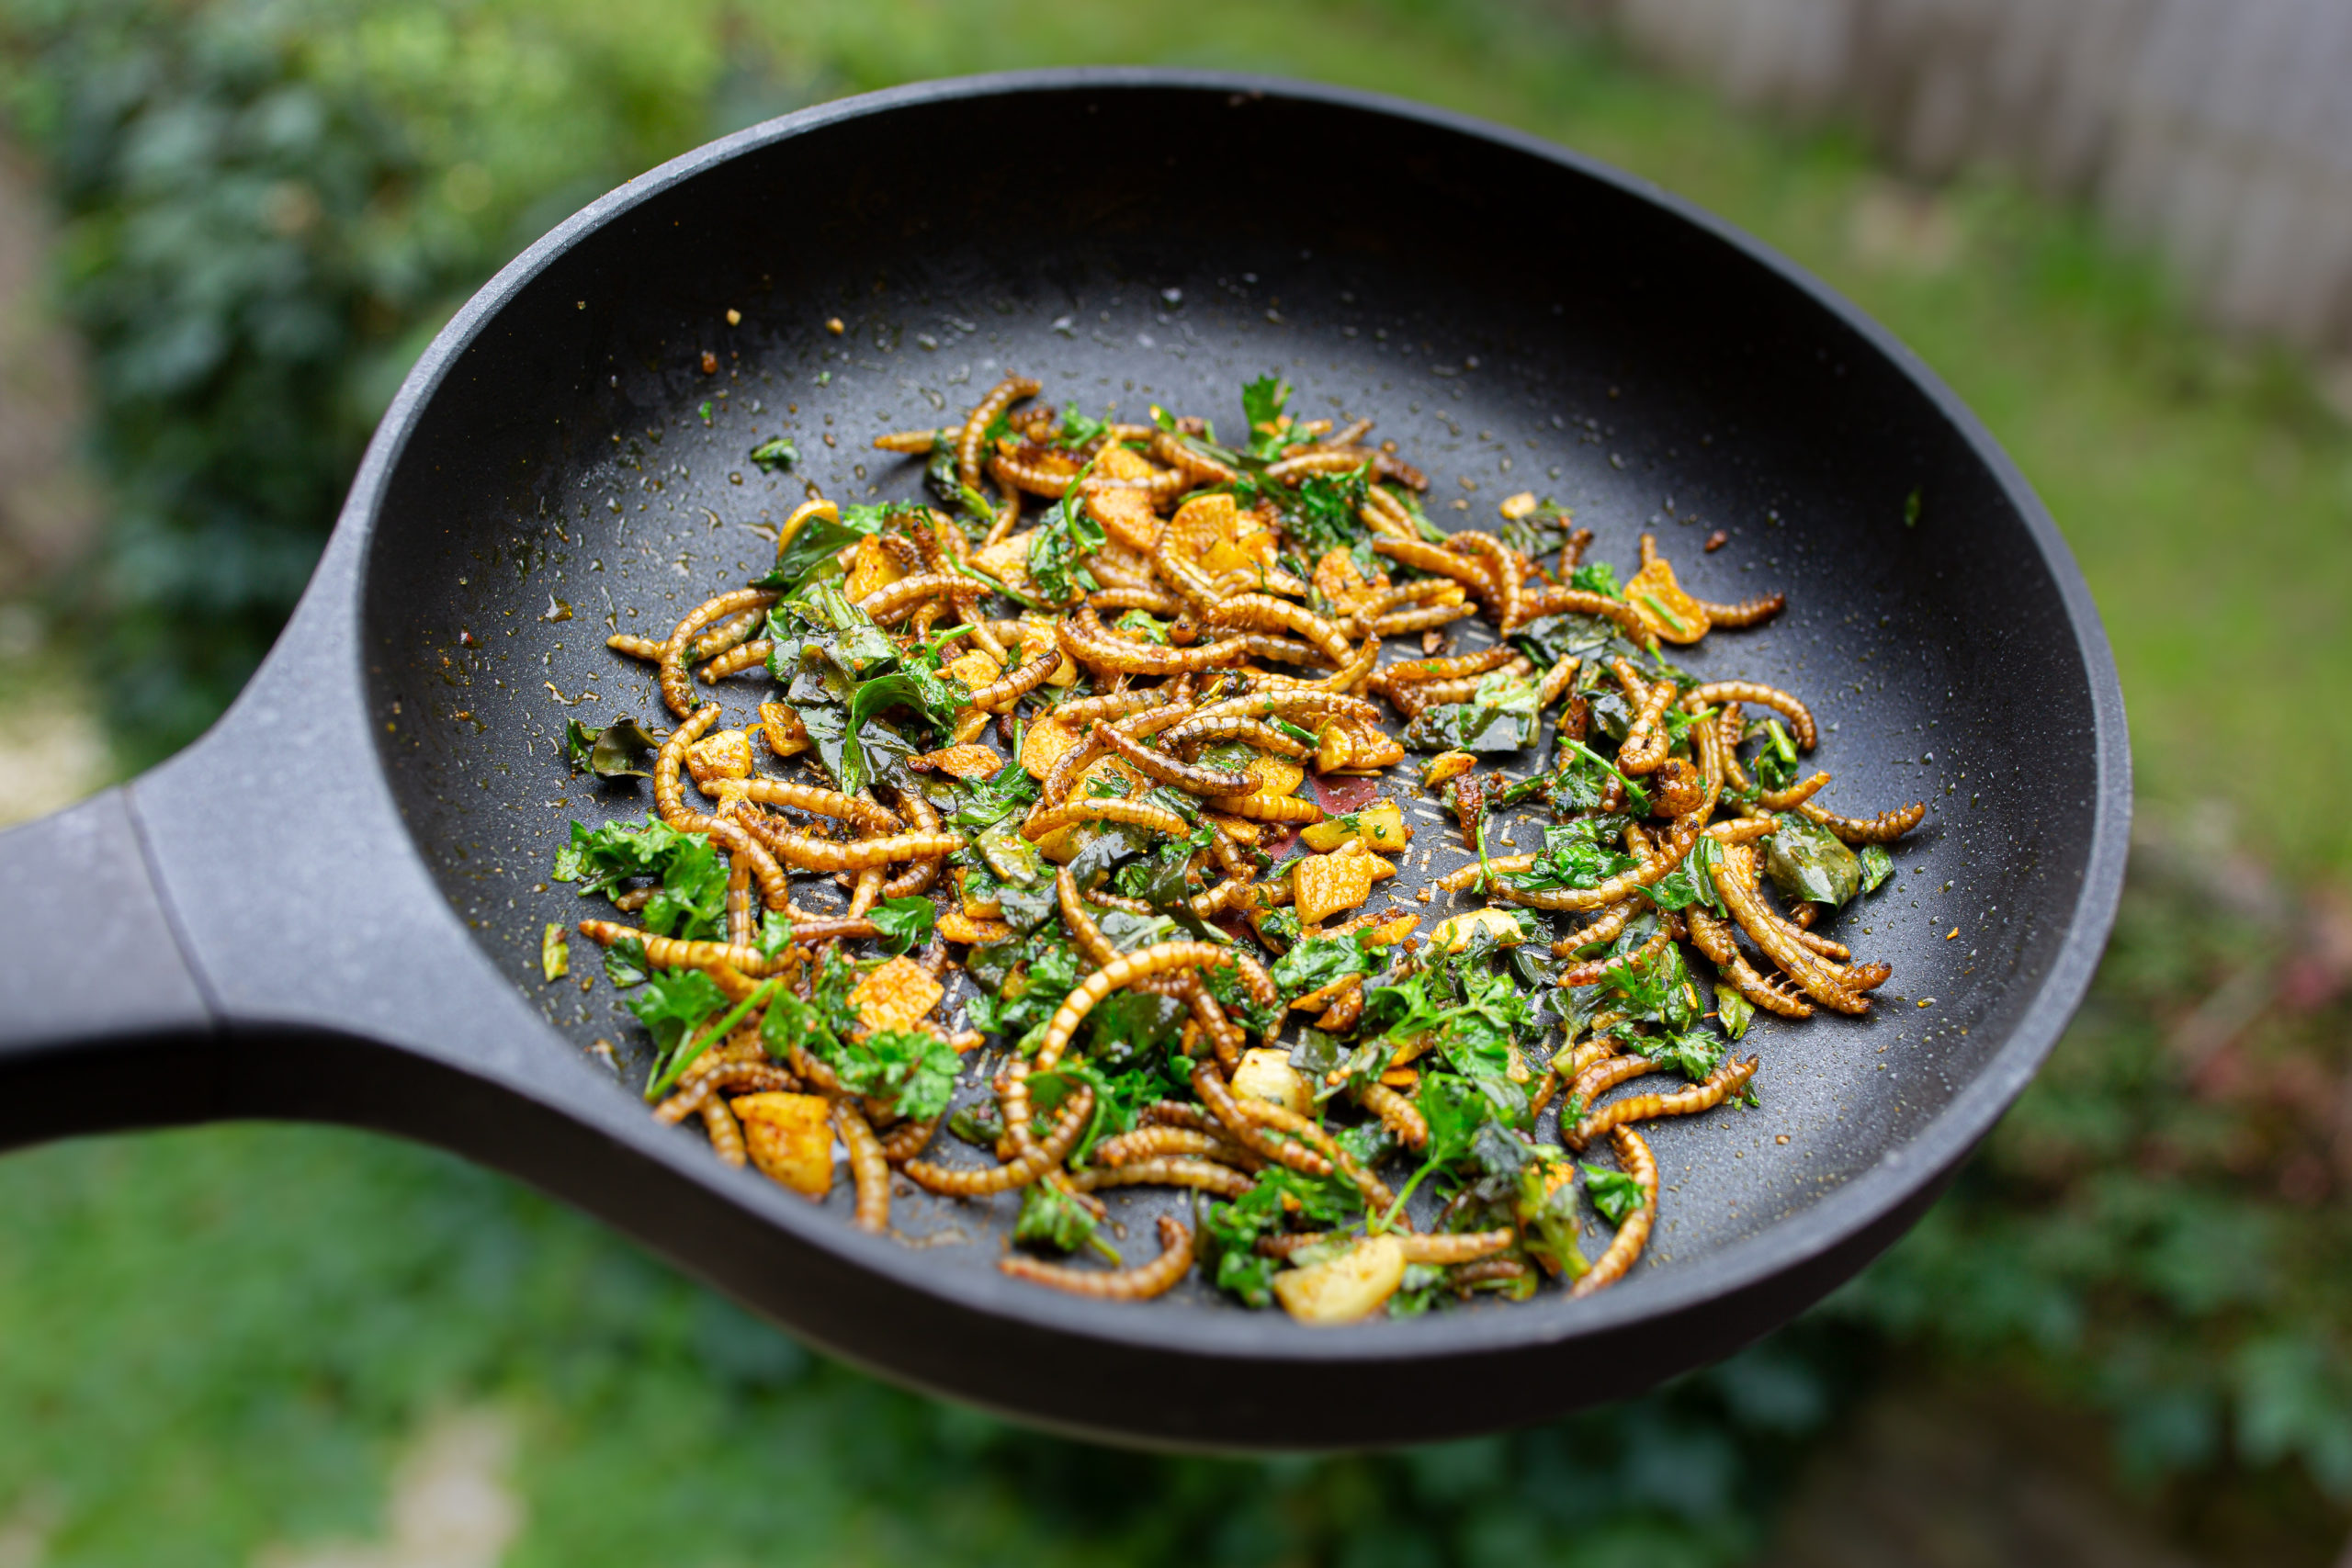 Frying,Of,Edible,Mealworm,Larvae,Mixed,With,Spice,And,Herbs